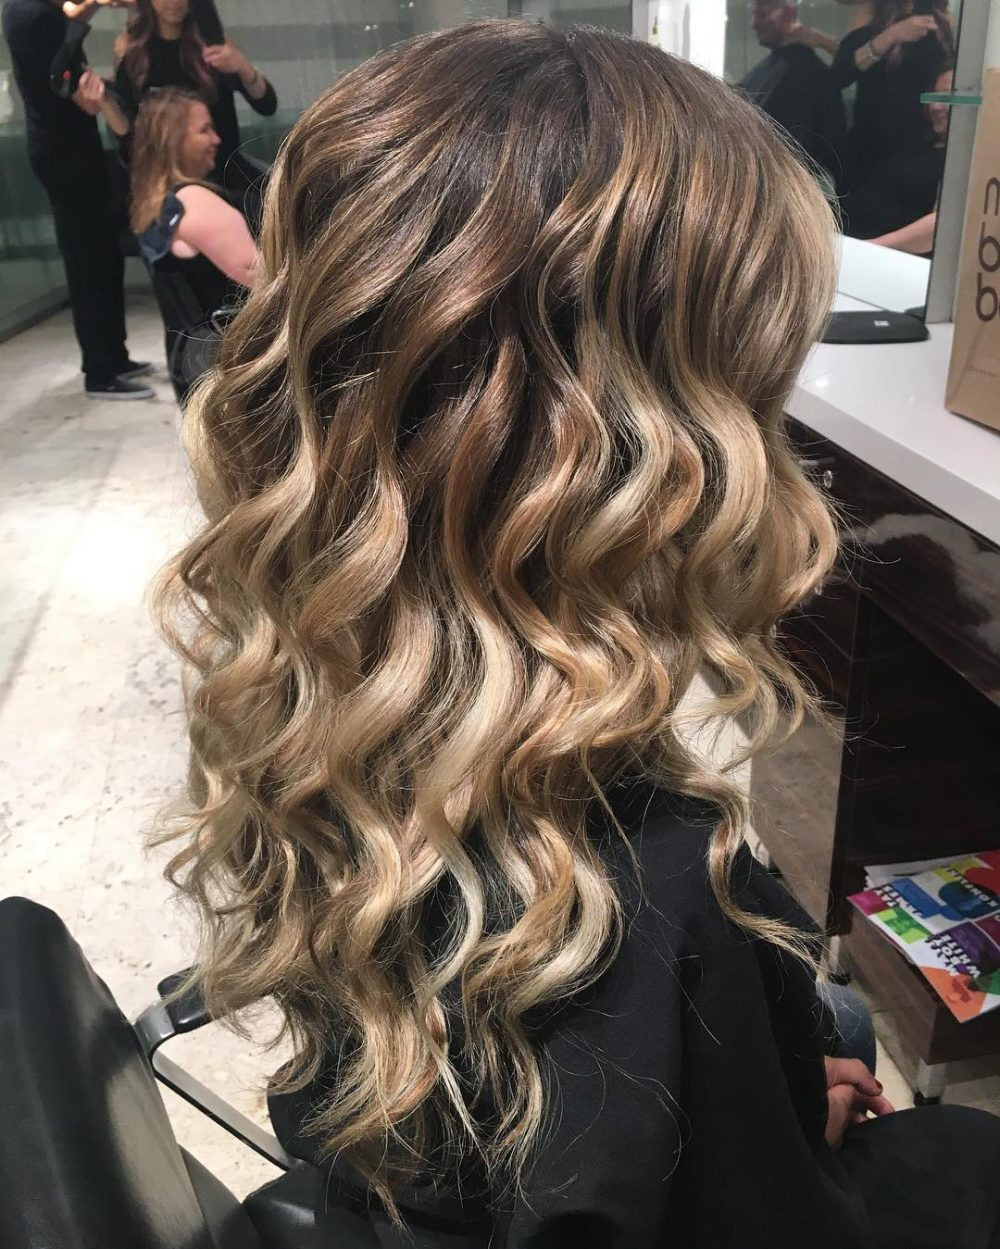 Prom Hairstyle For Long Curly Hair
 18 Stunning Curly Prom Hairstyles for 2019 Updos Down